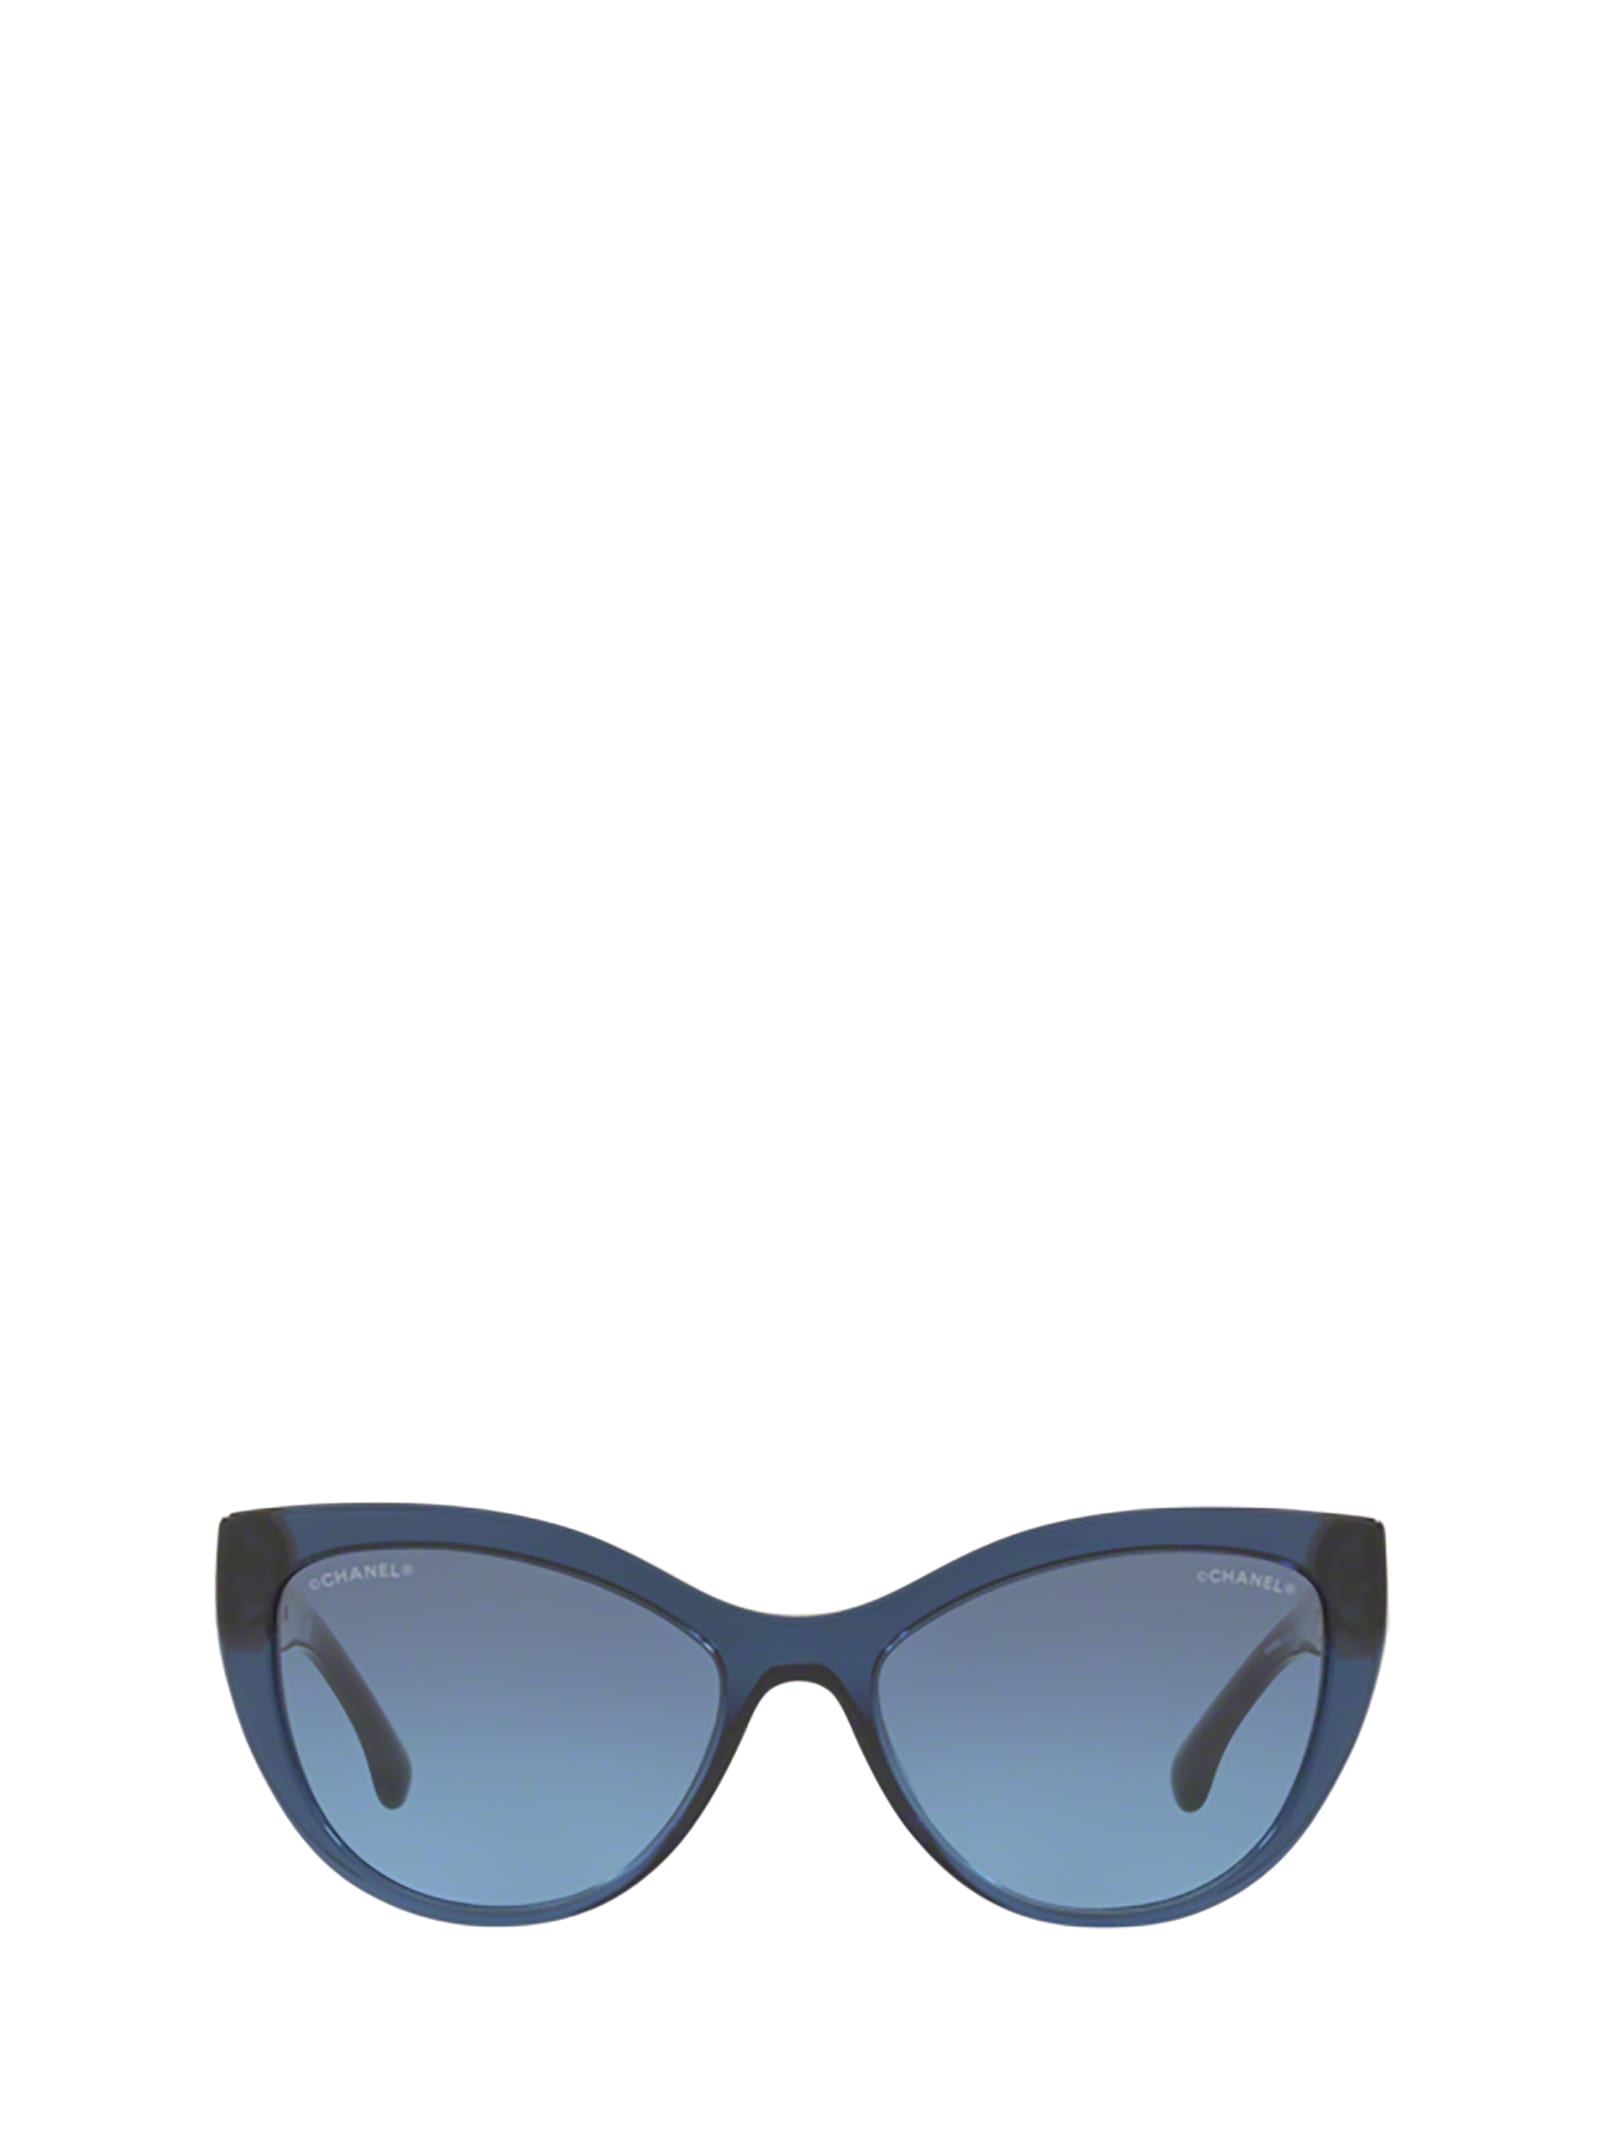 Pre-owned Chanel Ch5409 Blue Sunglasses